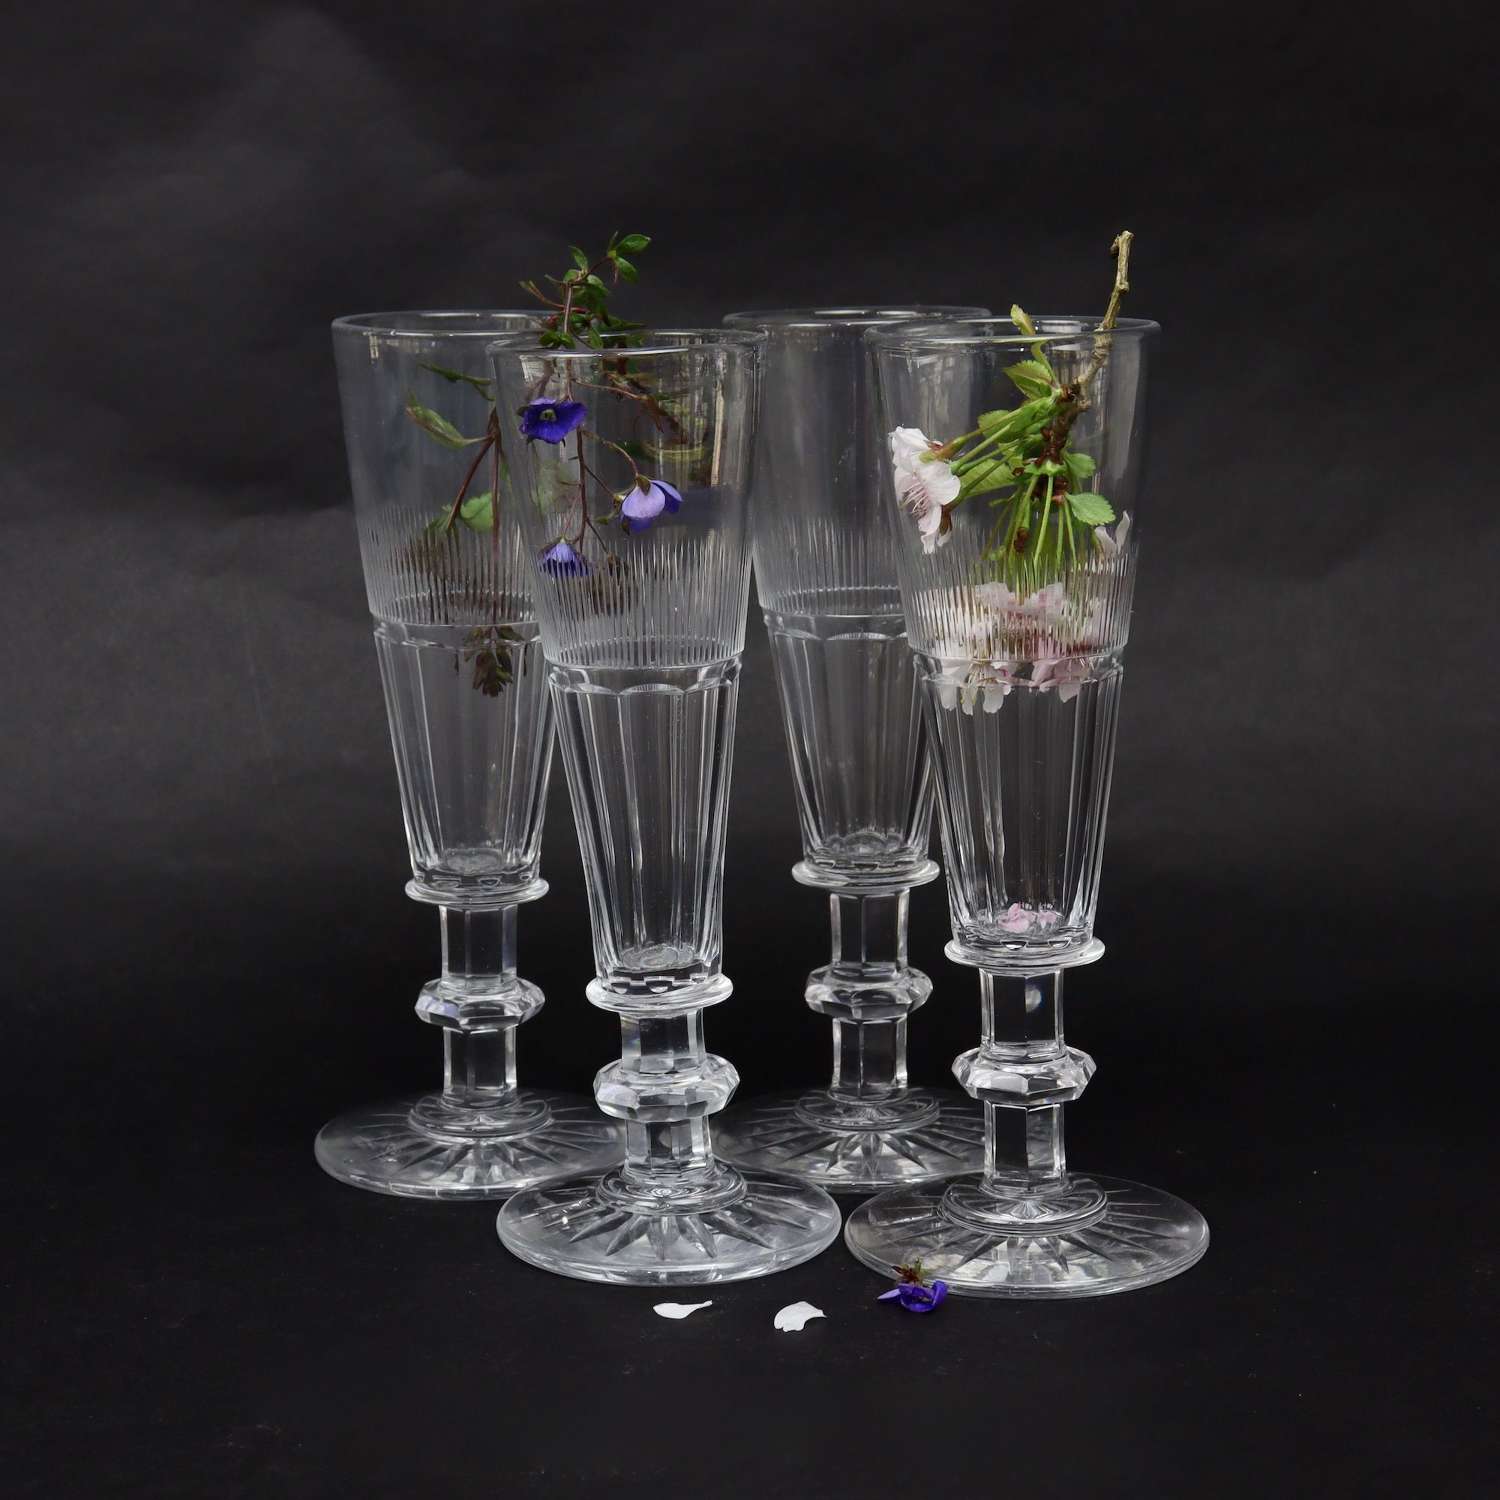 Mid 19th century Baccarat champagne flutes